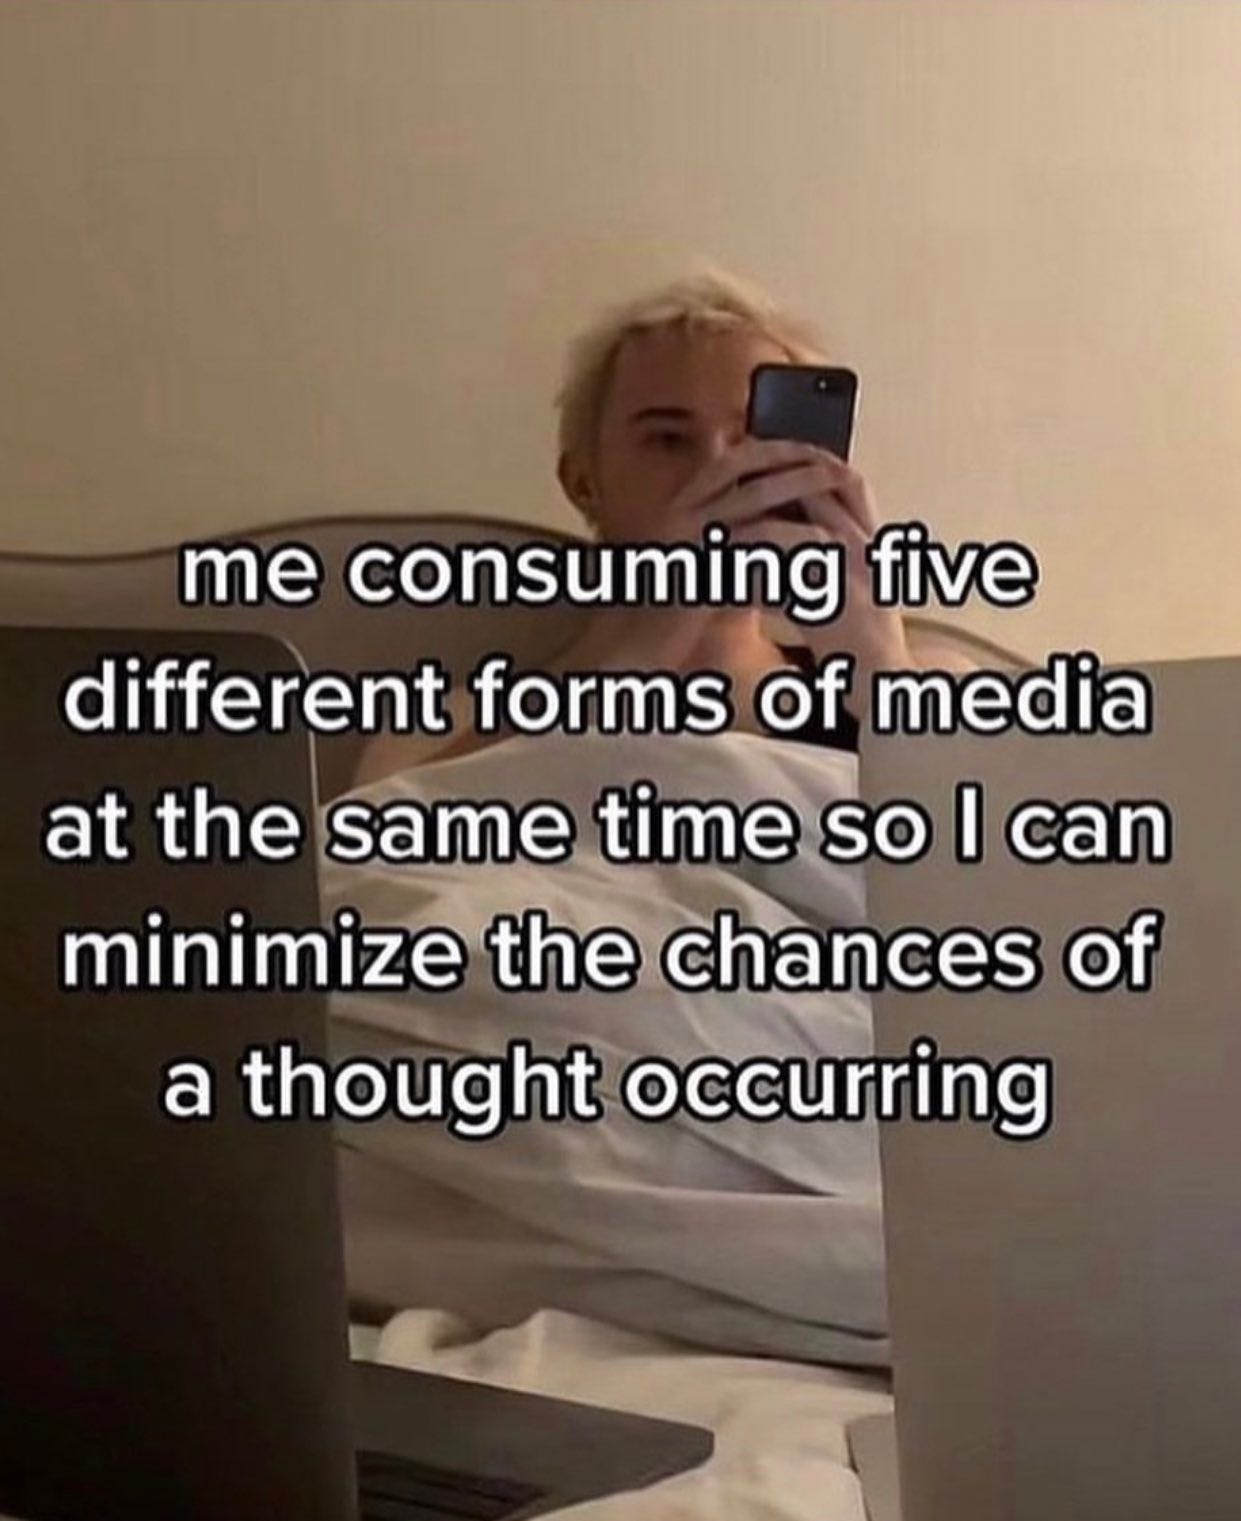 a blonde haired person sits in bed staring at their cell phone, text reads "me consuming five different forms of media at the same time so I can minimize the chances of a thought occurring"